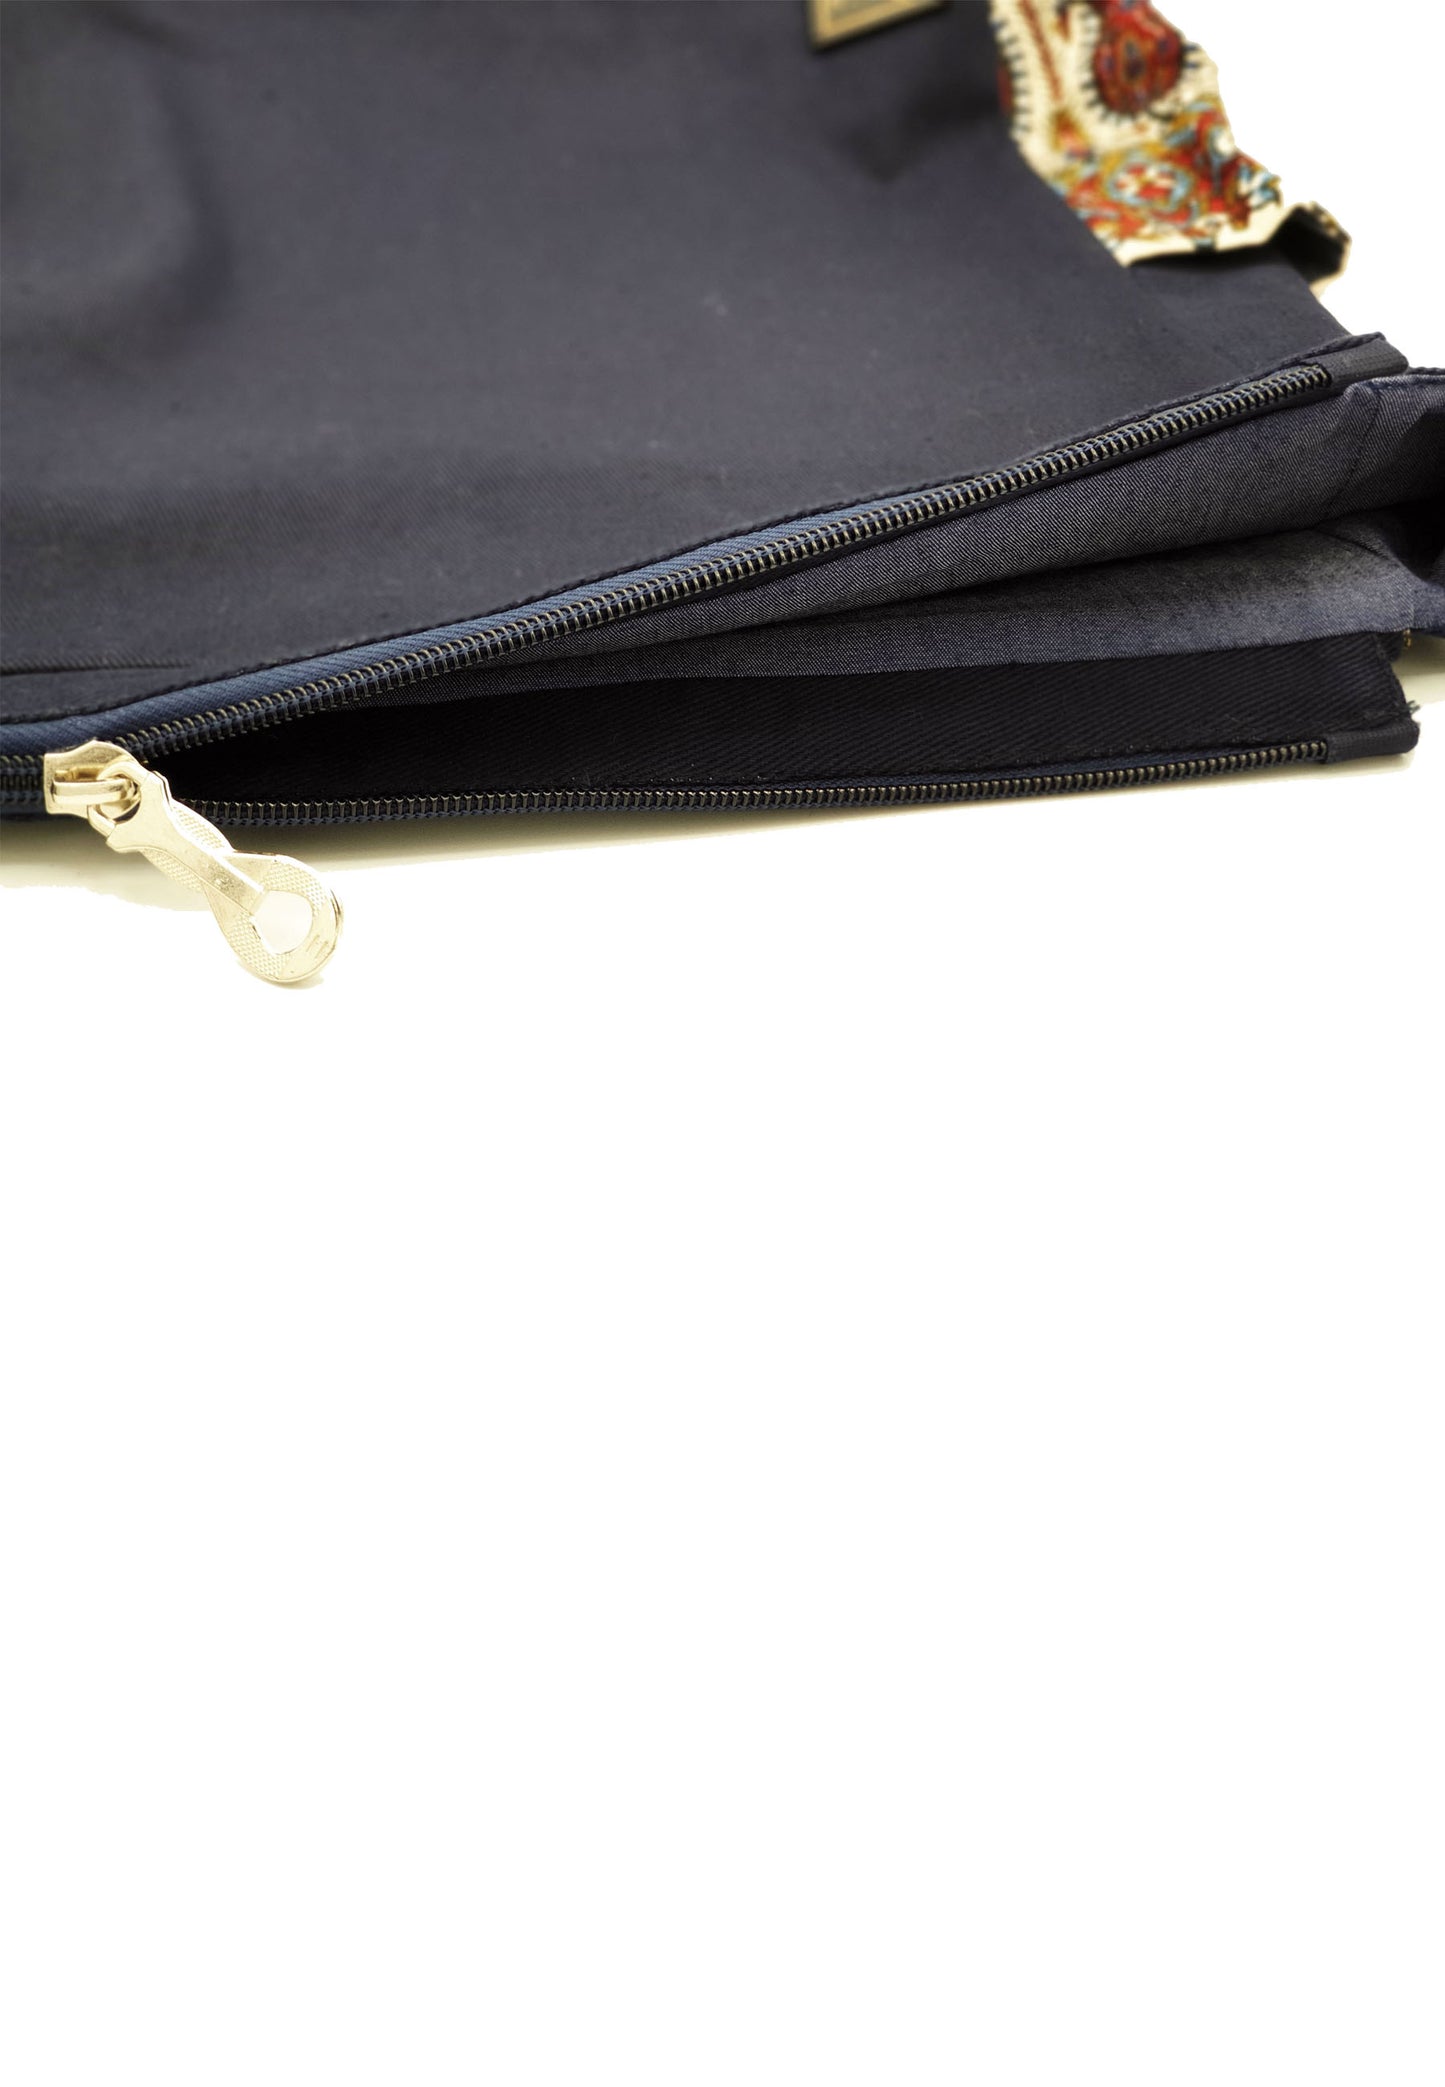 Crossbody Fabric Bag - Large size in color Navy